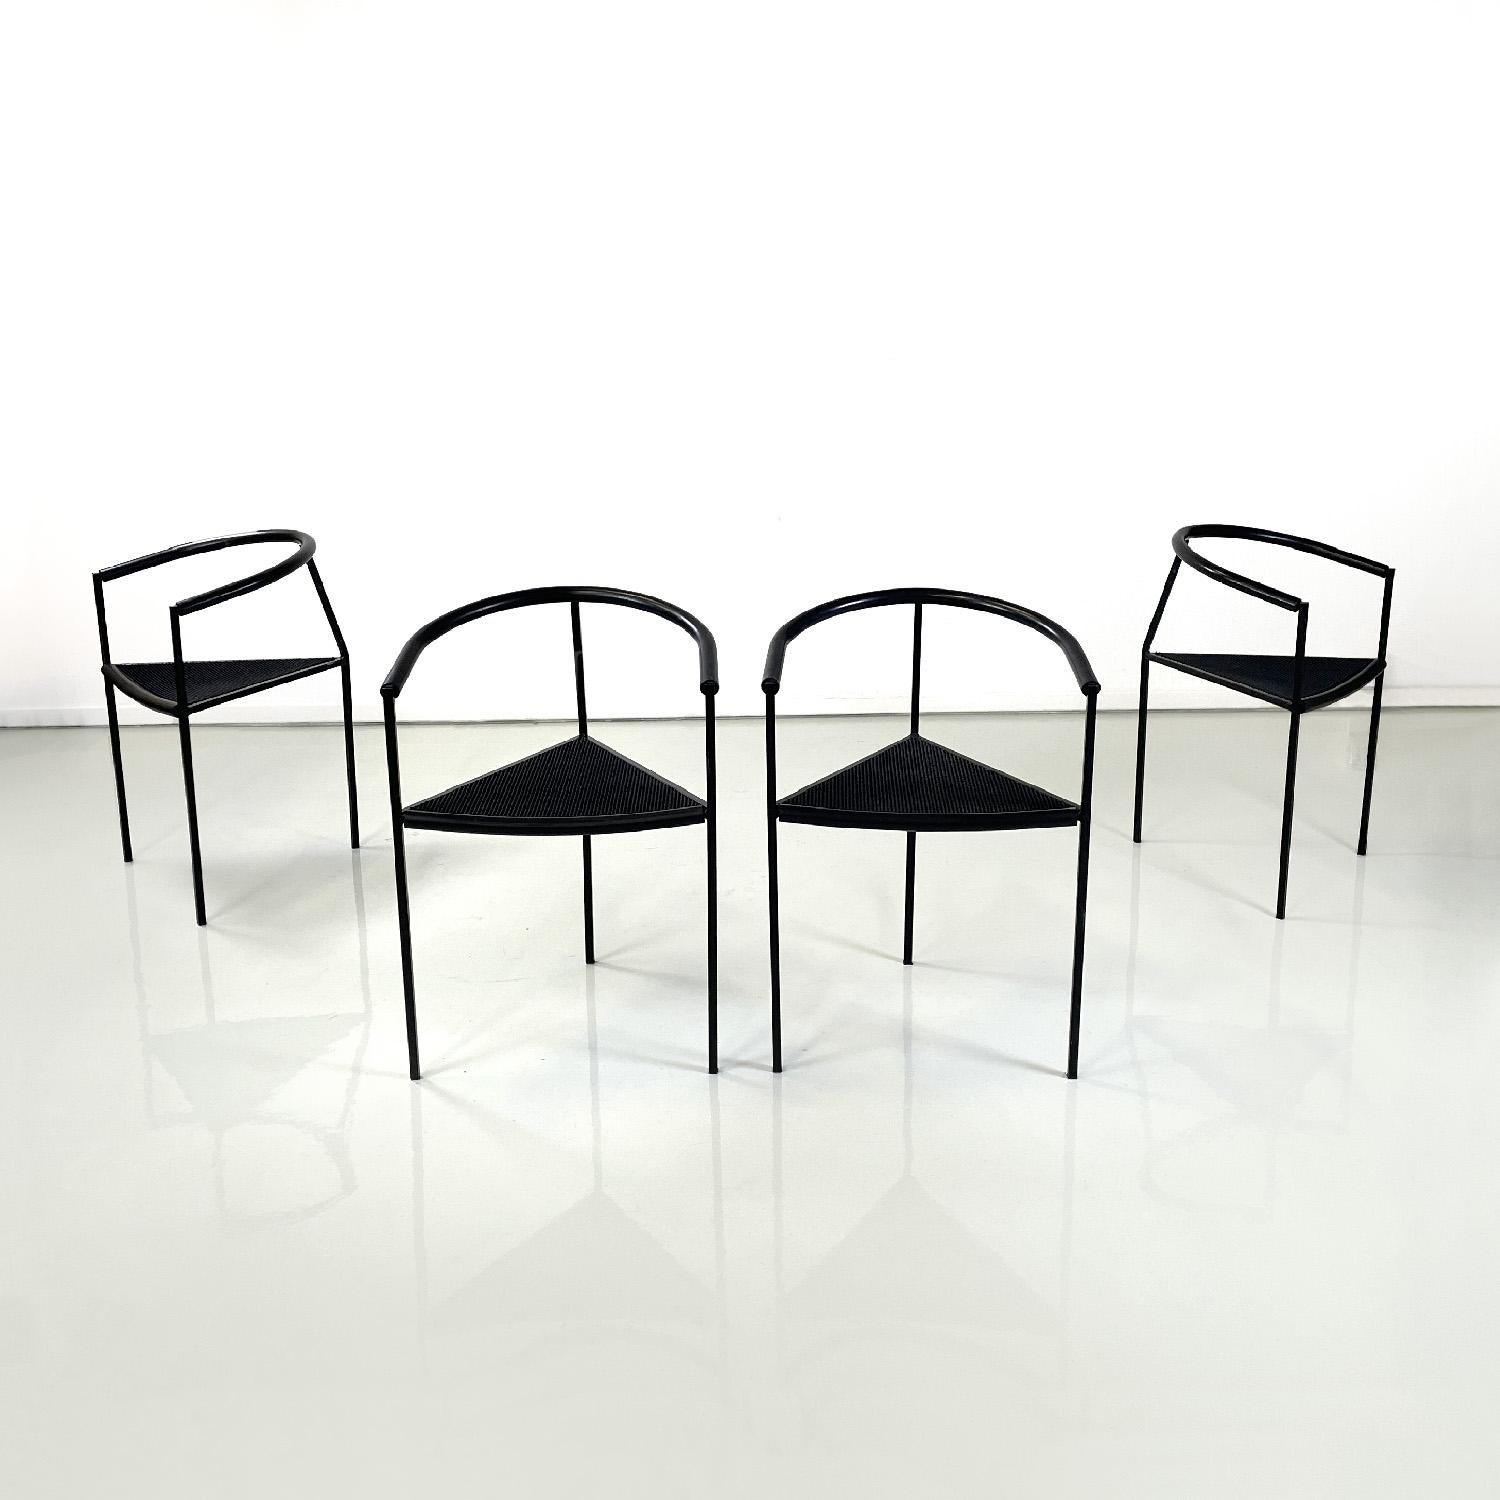 Italian modern black metal rubber chairs by Peregalli Calatroni for Zeus, 1990s
Set of four chairs with triangular seat in textured black rubber. The structure has a square section in matt black painted steel. The chair has a backrest and armrests